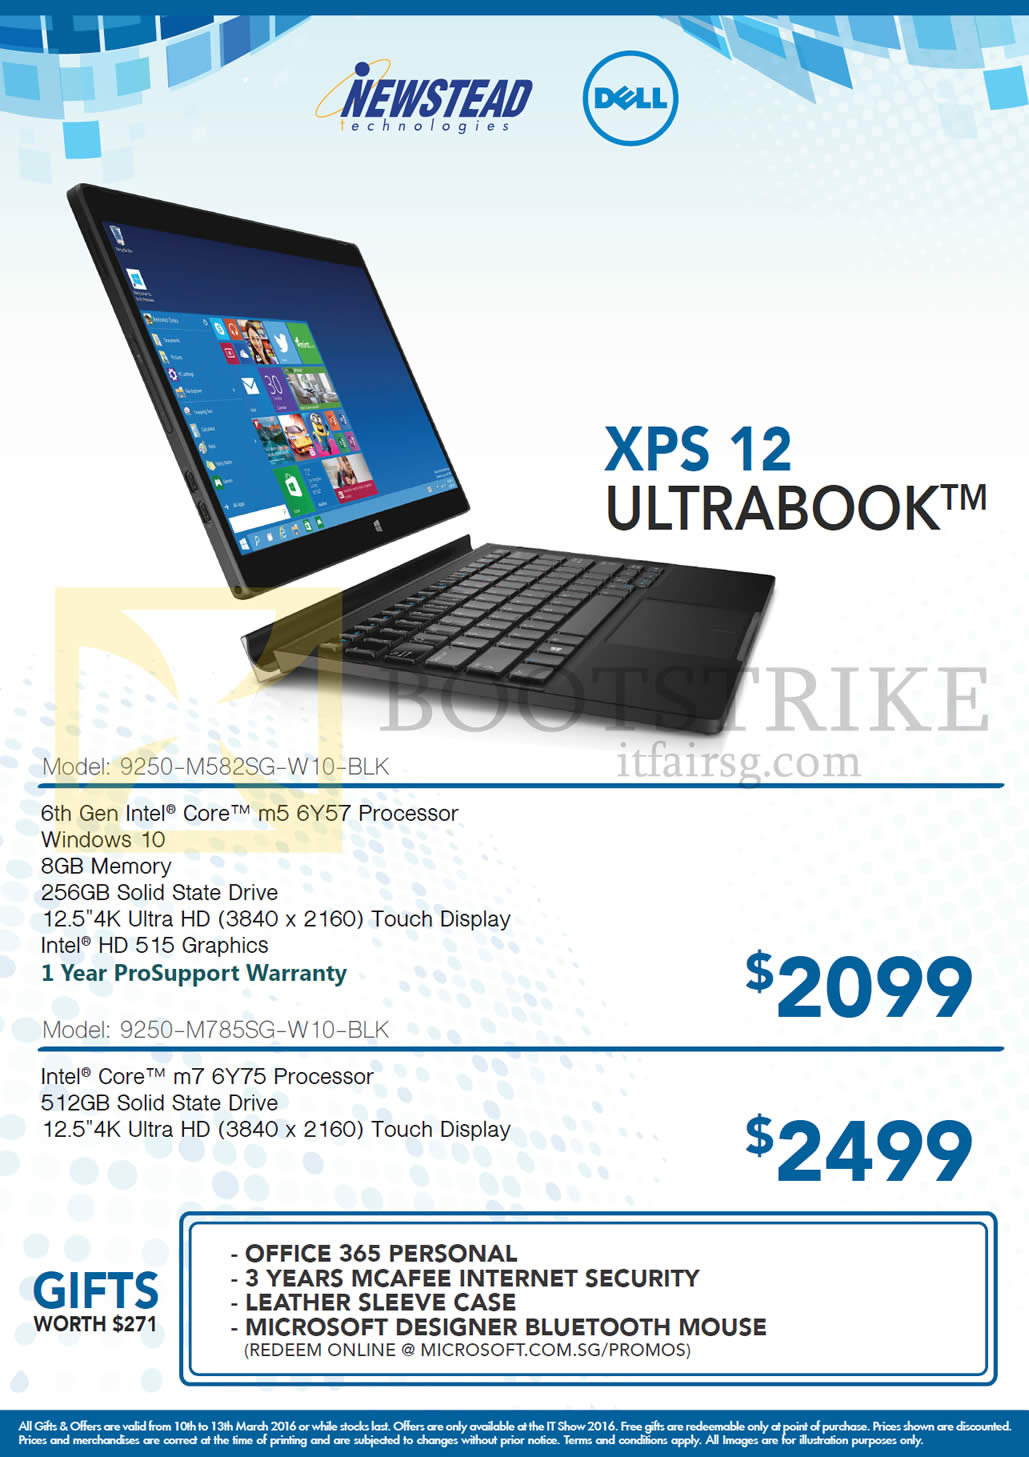 IT SHOW 2016 price list image brochure of Dell Newstead Notebook XPS 12